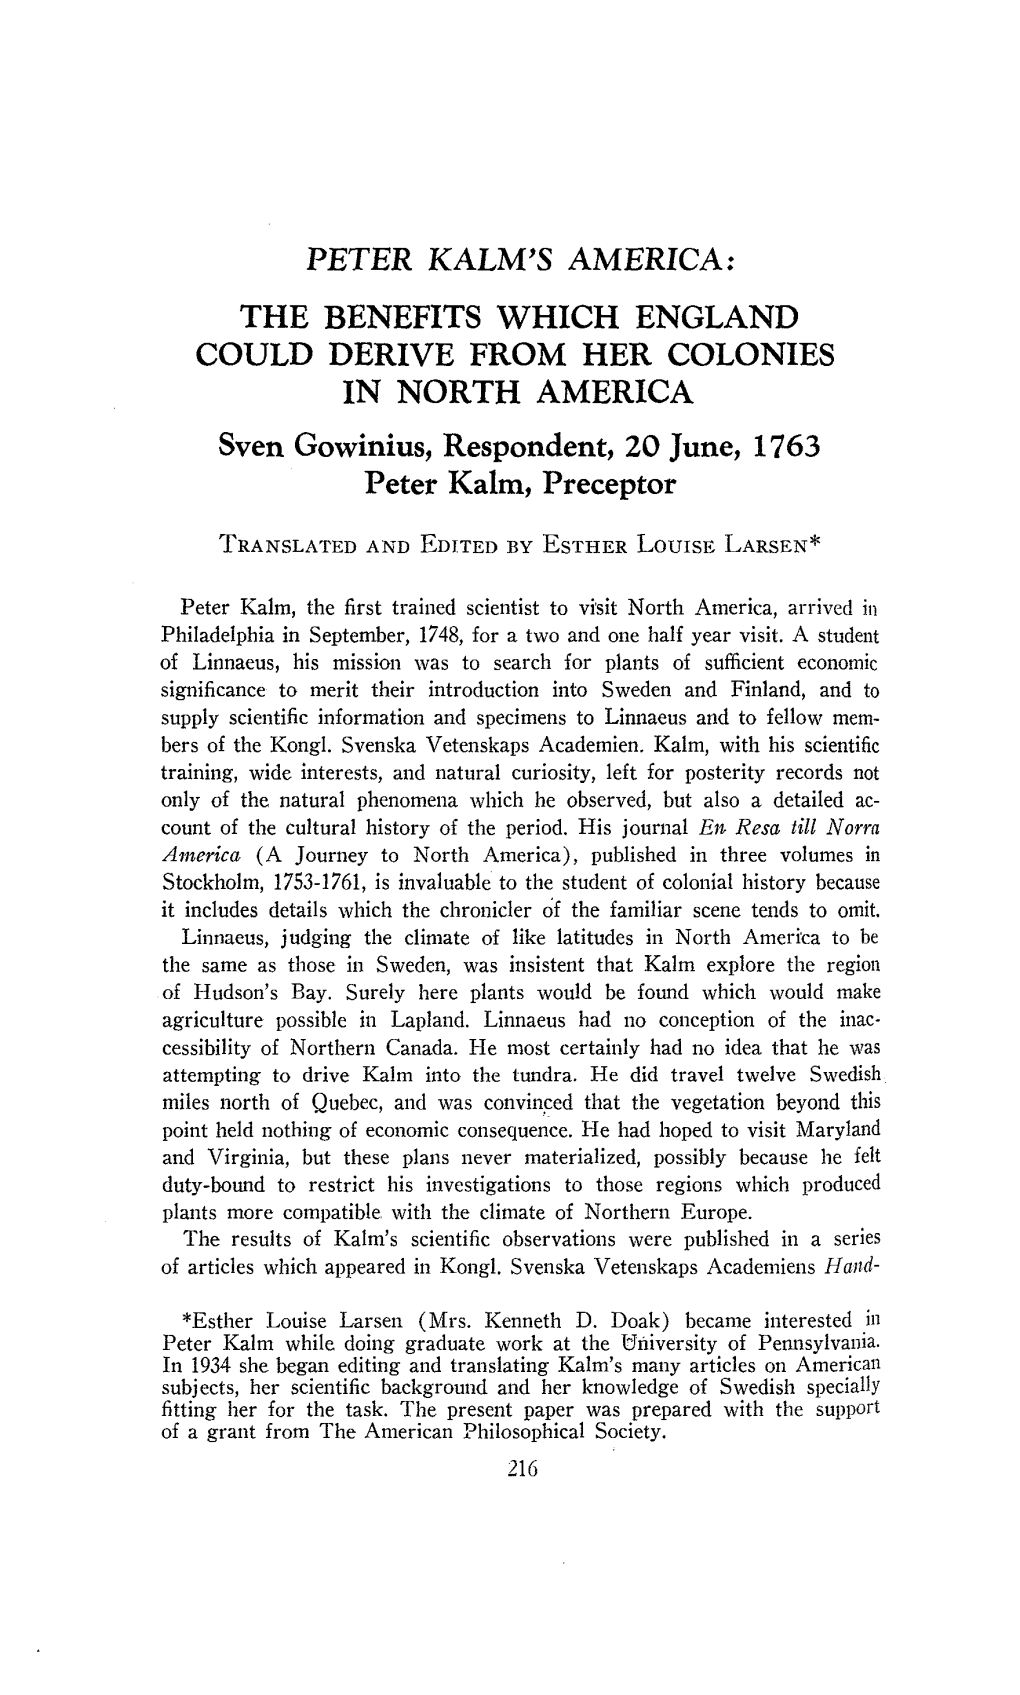 PETER KALM's AMERICA: the BENEFITS WHICH ENGLAND COULD DERIVE from HER COLONIES in NORTH AMERICA Sven Gowinius, Respondent, 20 June, 1763 Peter Kalm, Preceptor